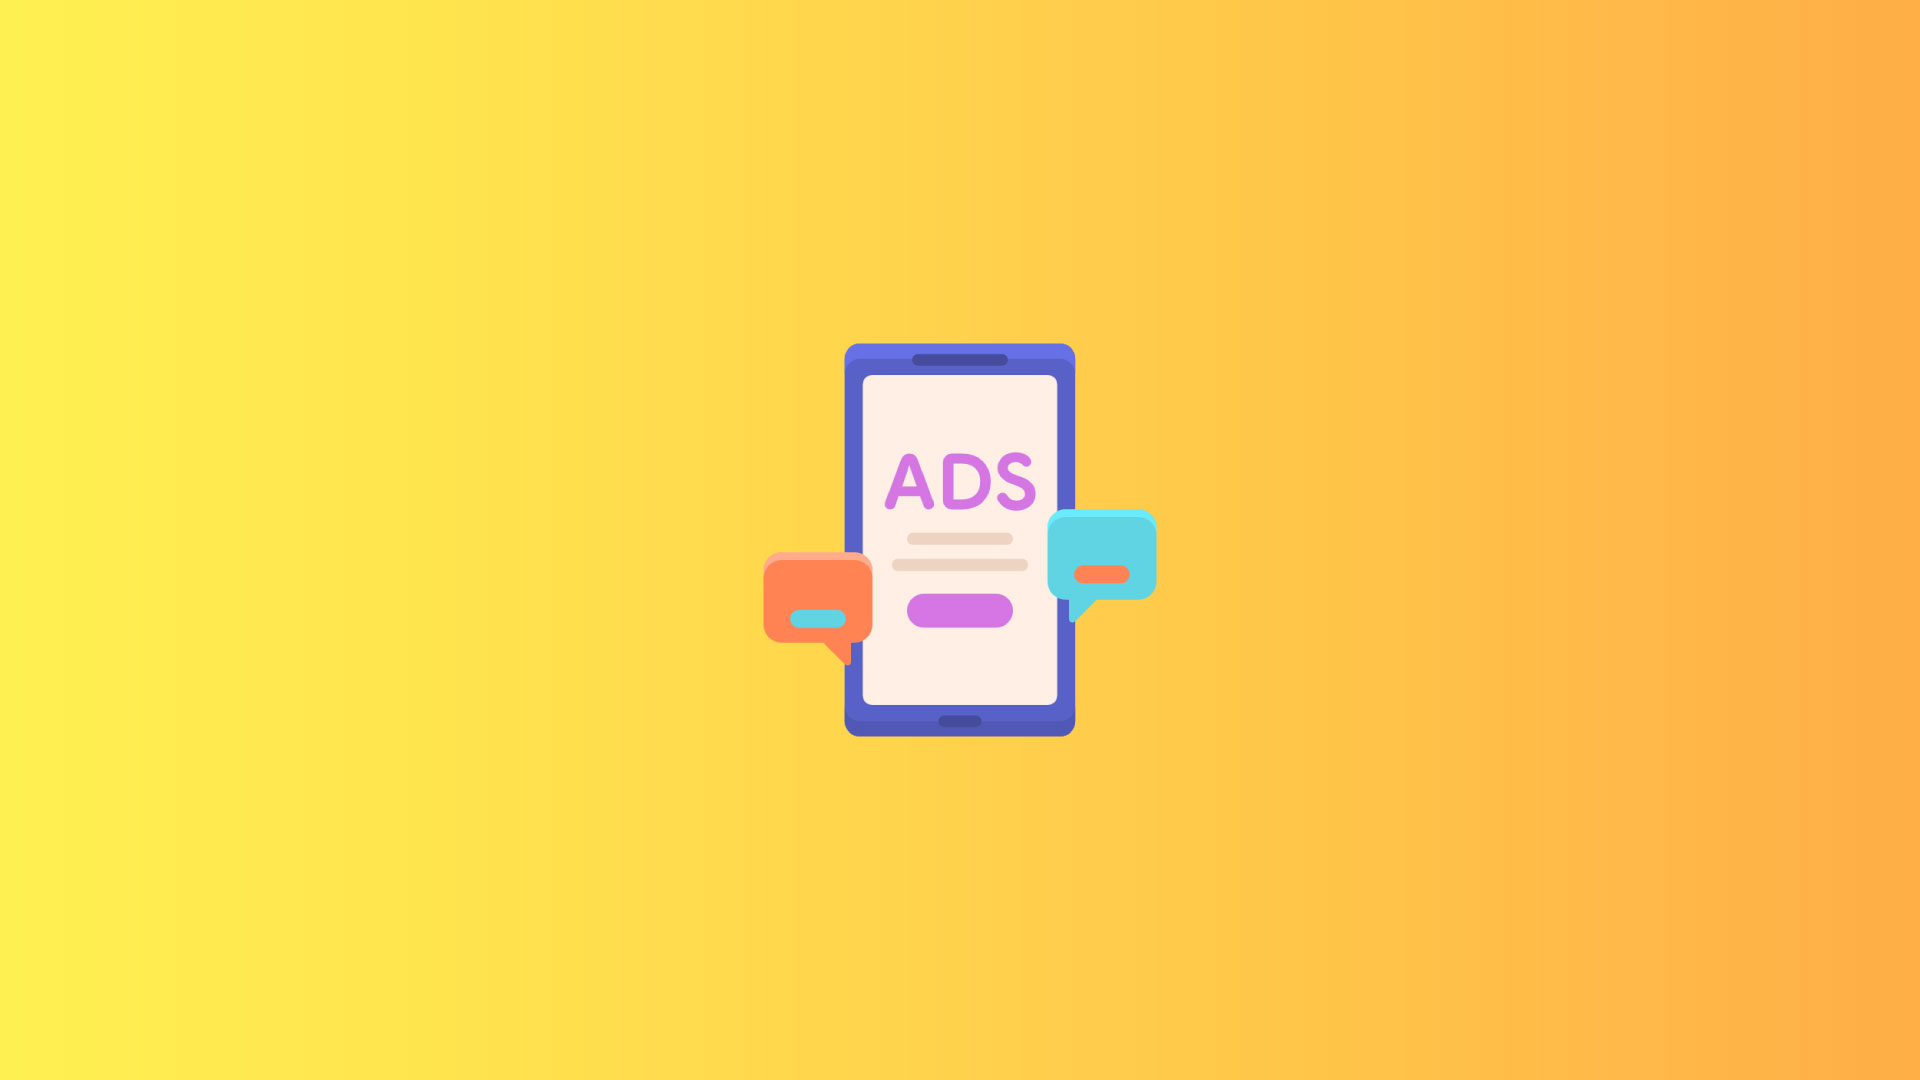 WHAT ARE MOBILE FALLBACK ADS AND HOW DO THEY PERFORM?